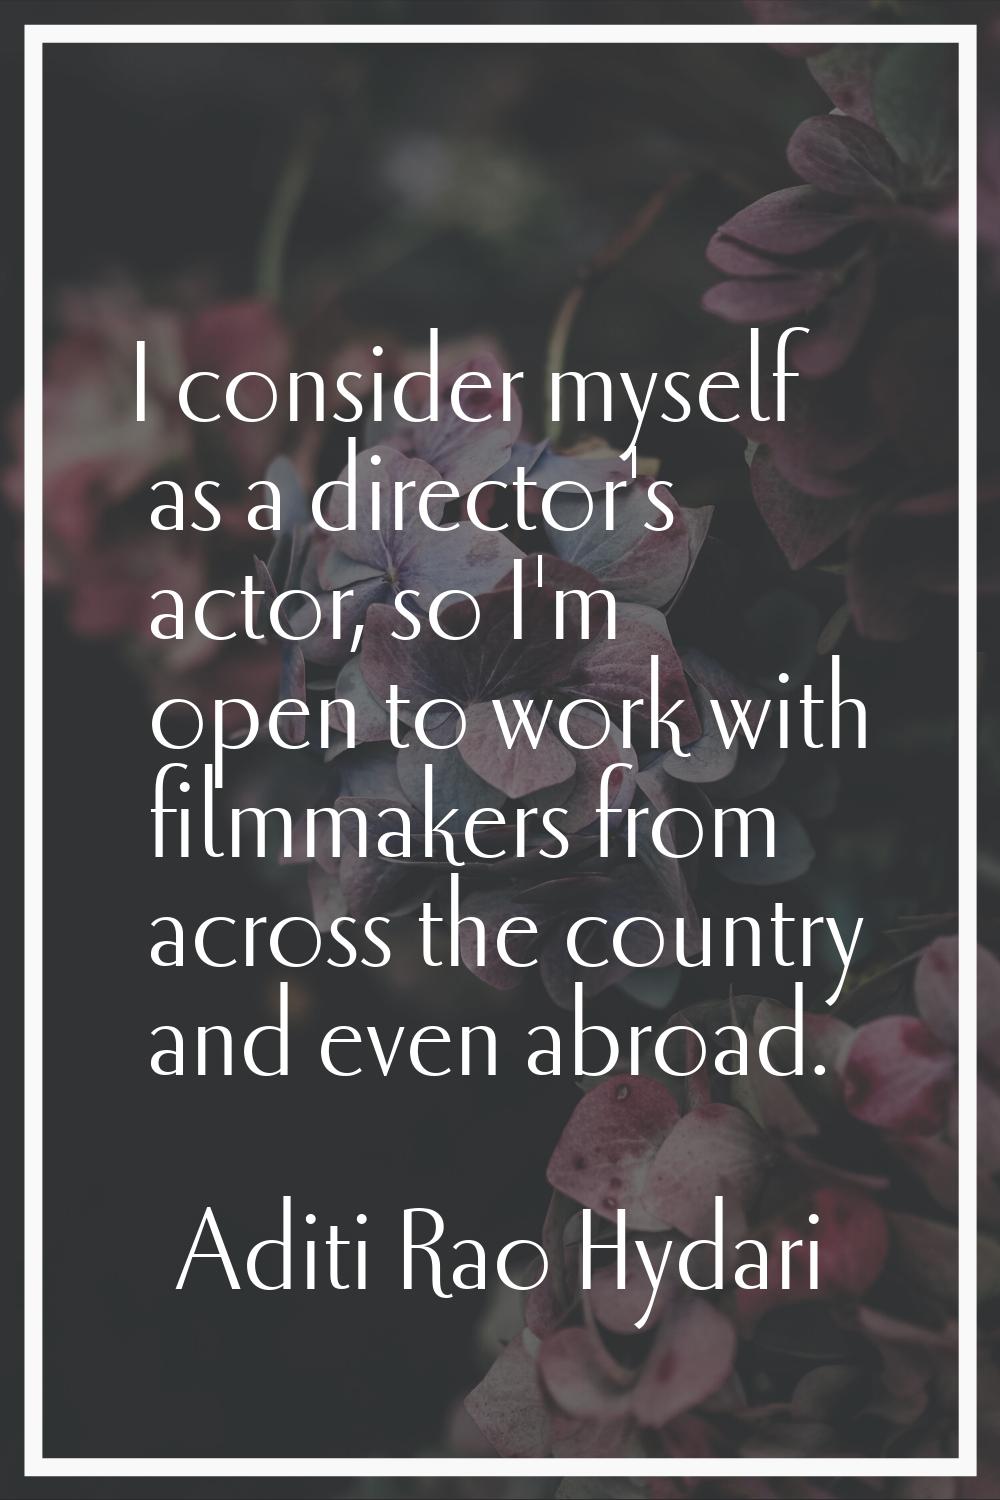 I consider myself as a director's actor, so I'm open to work with filmmakers from across the countr